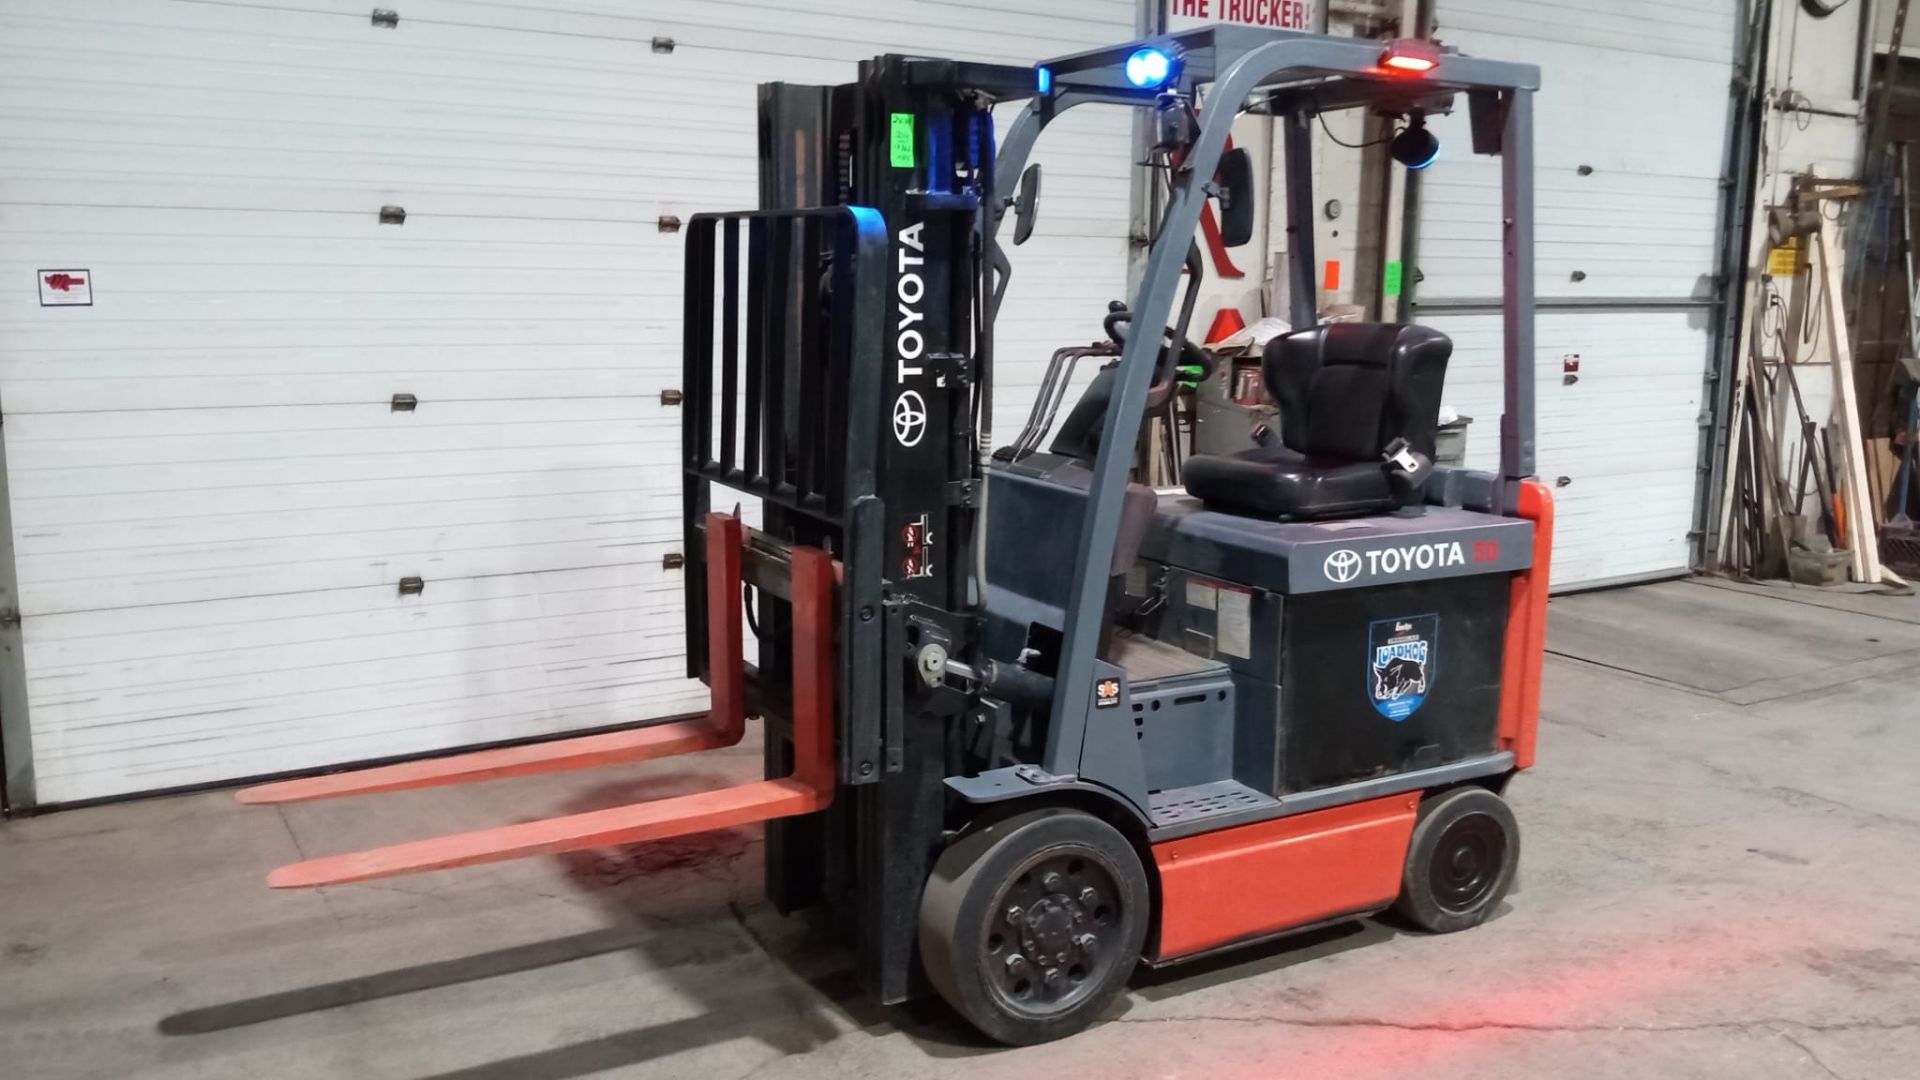 2014 TOYOTA 5,000lbs Capacity Electric Forklift 36V with sideshift & 3-Stage Mast - FREE CUSTOMS - Image 3 of 6